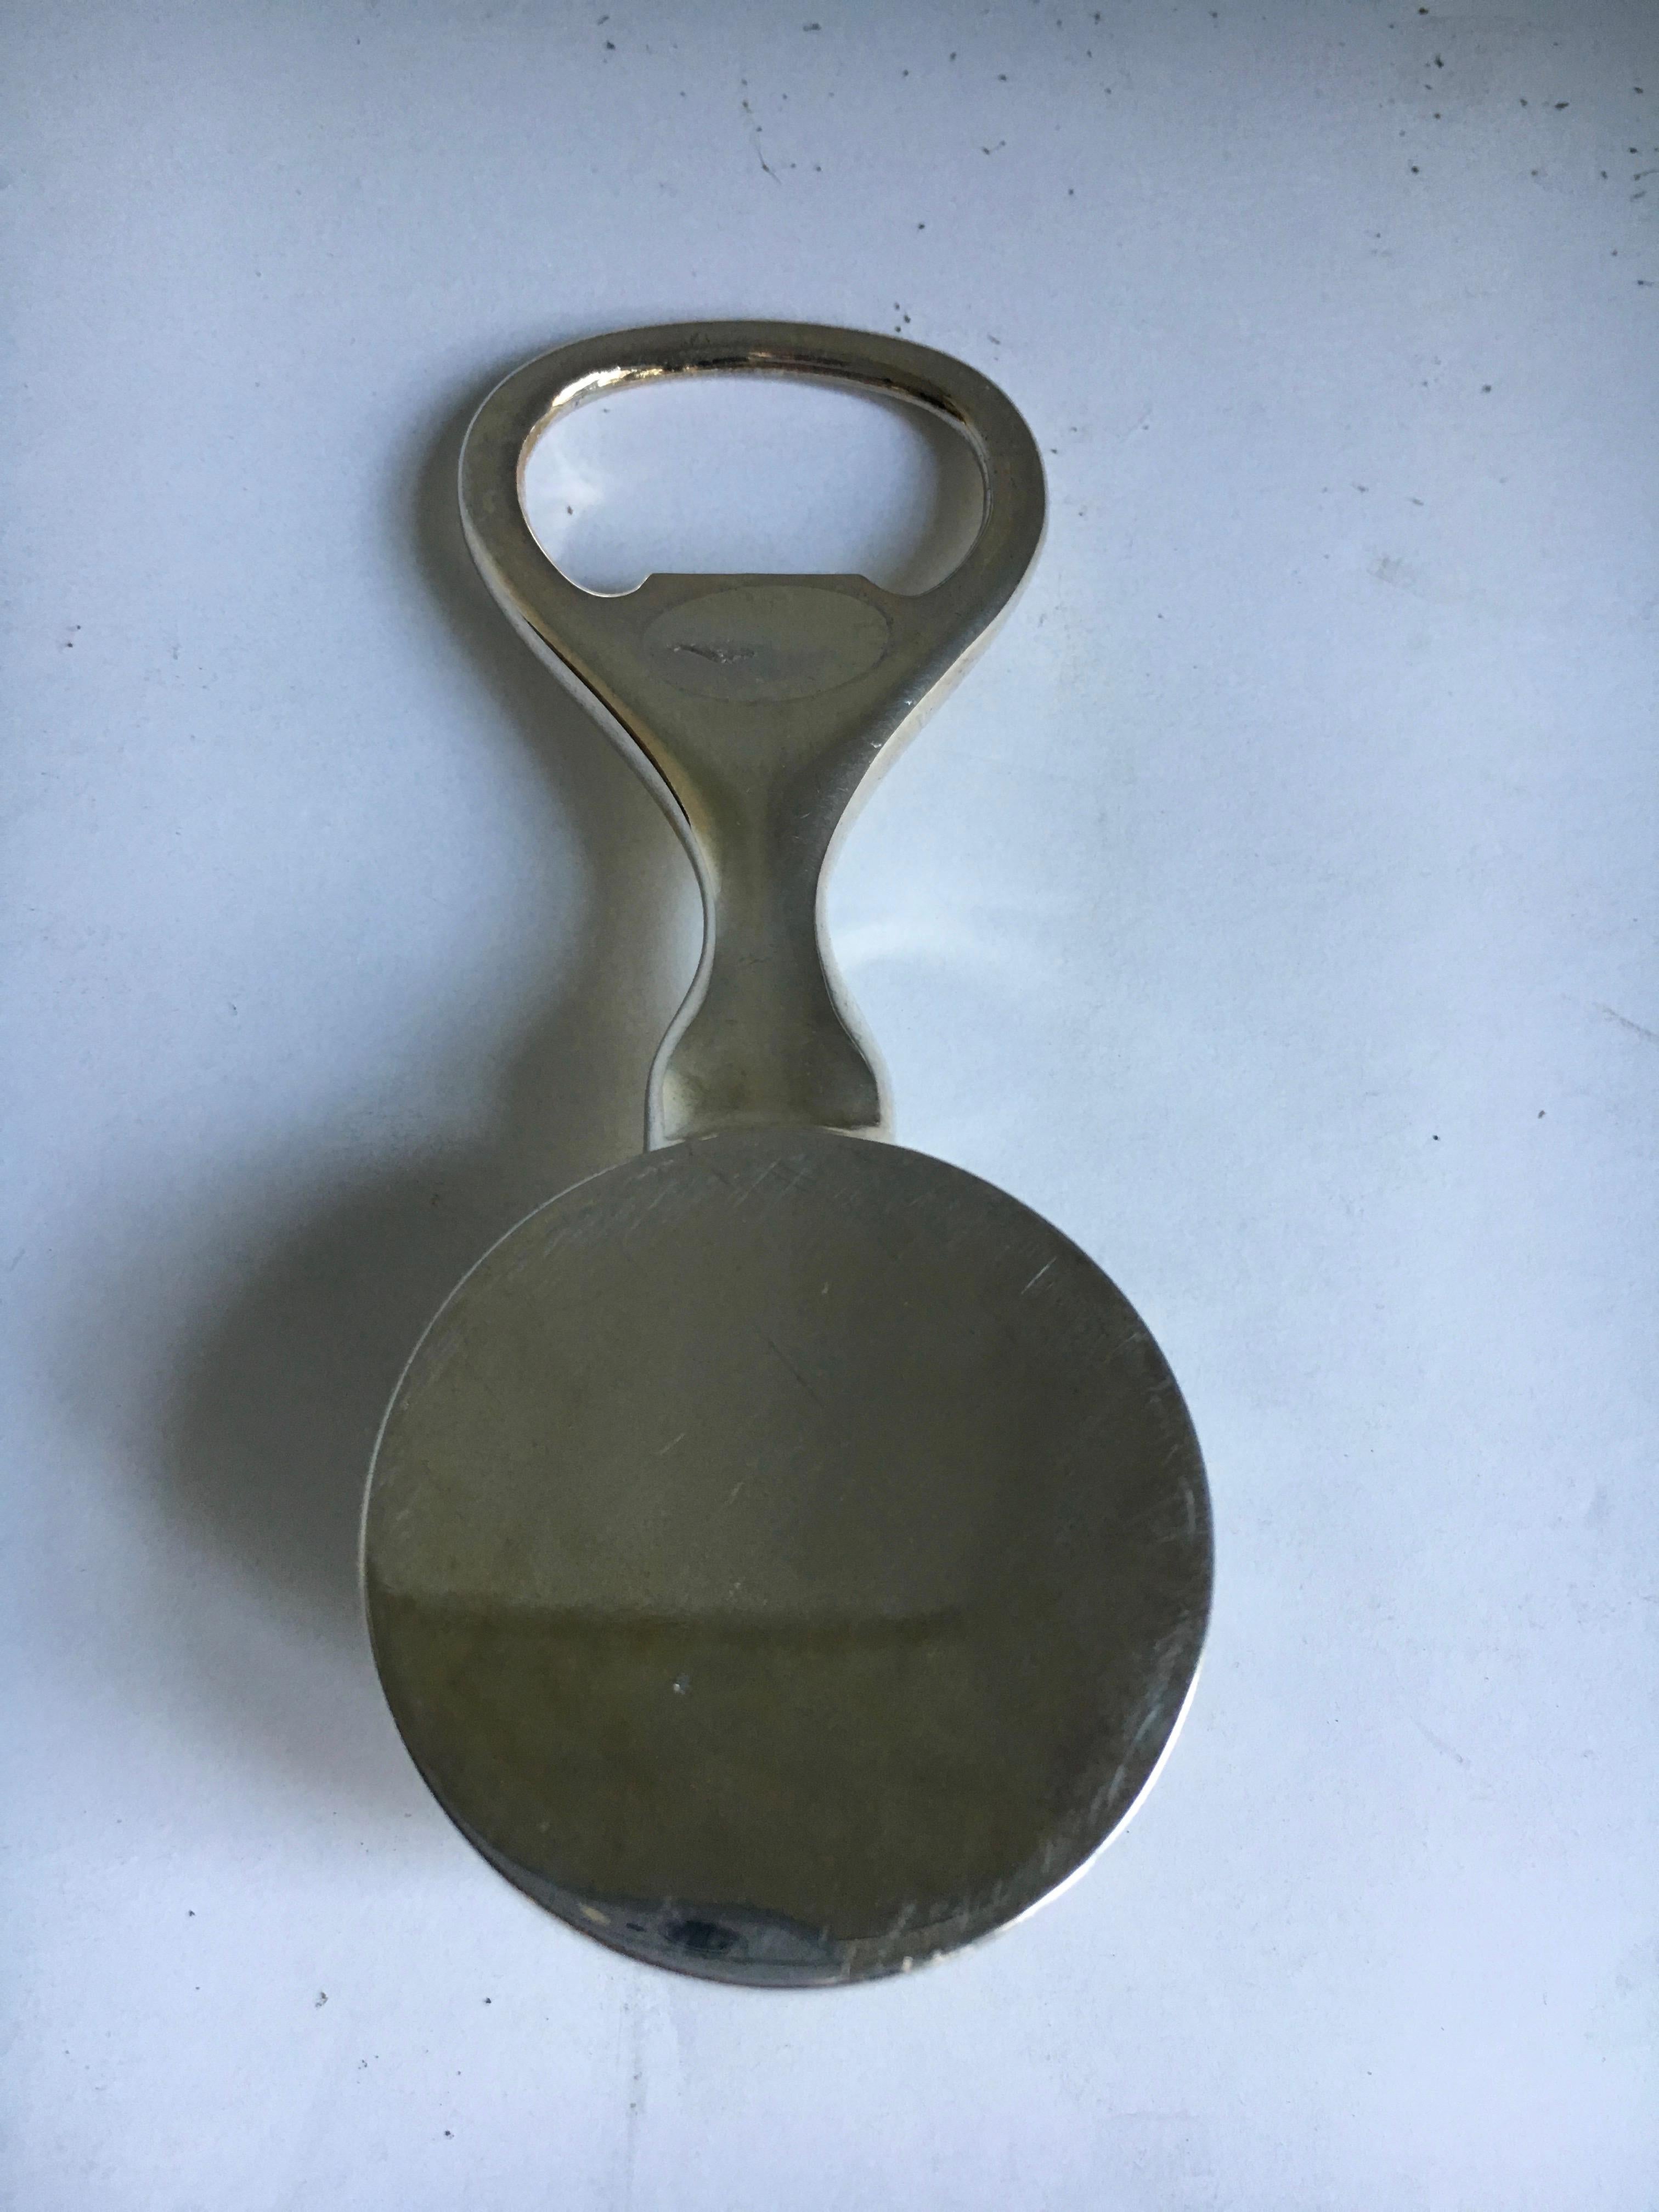 A very handsome bottle opener with golf ball handle - in excellent condition and perfect for the bar or office bar of the gold enthusiast. We have other golf related pieces - book ends, cocktail shaker - as us.